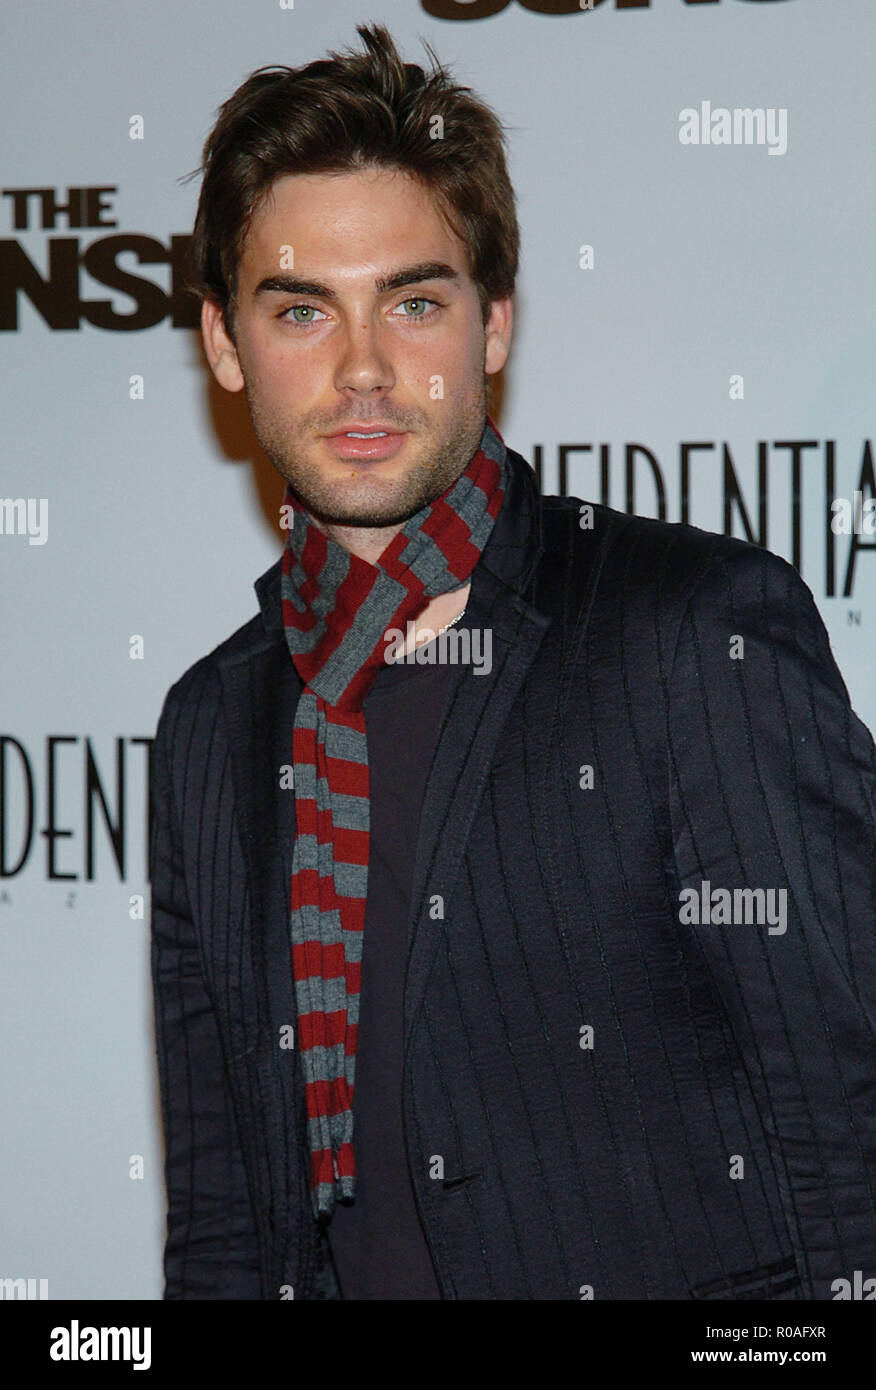 Drew Fuller arriving at the After Sunser Premiere at the Chinese Theatre in Los Angeles. November 4, 2004.FullerDrew123 Red Carpet Event, Vertical, USA, Film Industry, Celebrities,  Photography, Bestof, Arts Culture and Entertainment, Topix Celebrities fashion /  Vertical, Best of, Event in Hollywood Life - California,  Red Carpet and backstage, USA, Film Industry, Celebrities,  movie celebrities, TV celebrities, Music celebrities, Photography, Bestof, Arts Culture and Entertainment,  Topix, headshot, vertical, one person,, from the year , 2004, inquiry tsuni@Gamma-USA.com Stock Photo